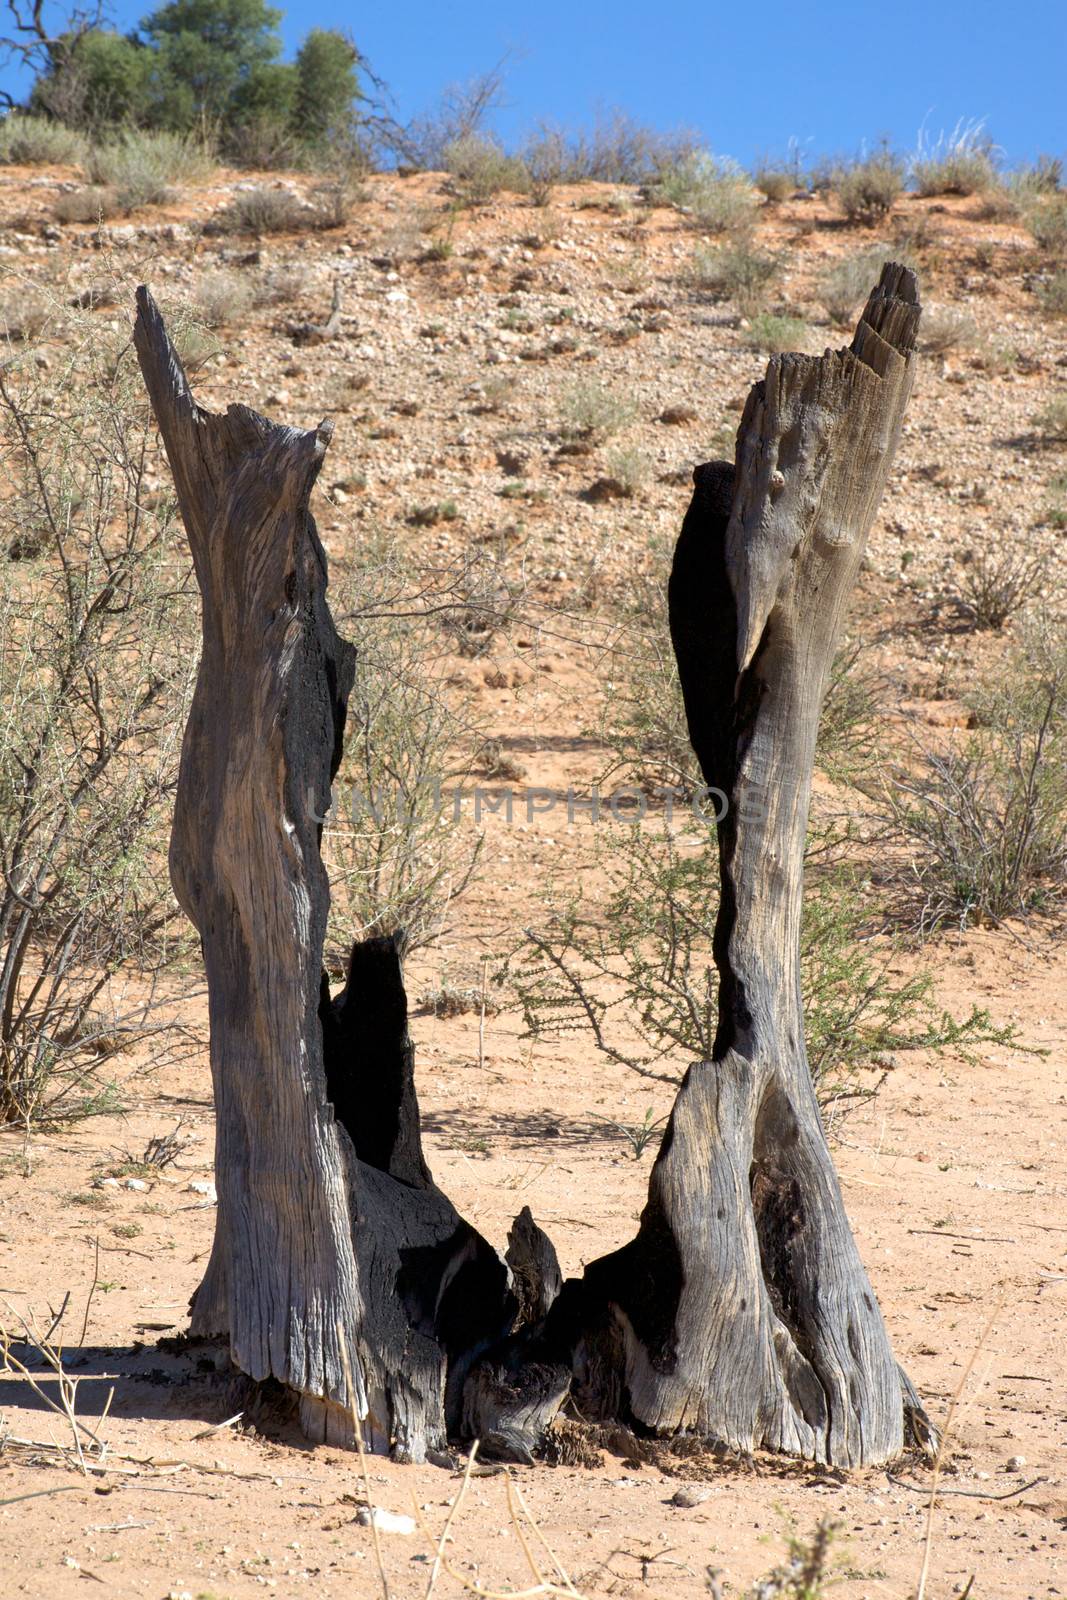 A dead tree hit by a strike in the desert. Kgalagadi Transfrontier Park. Namibia